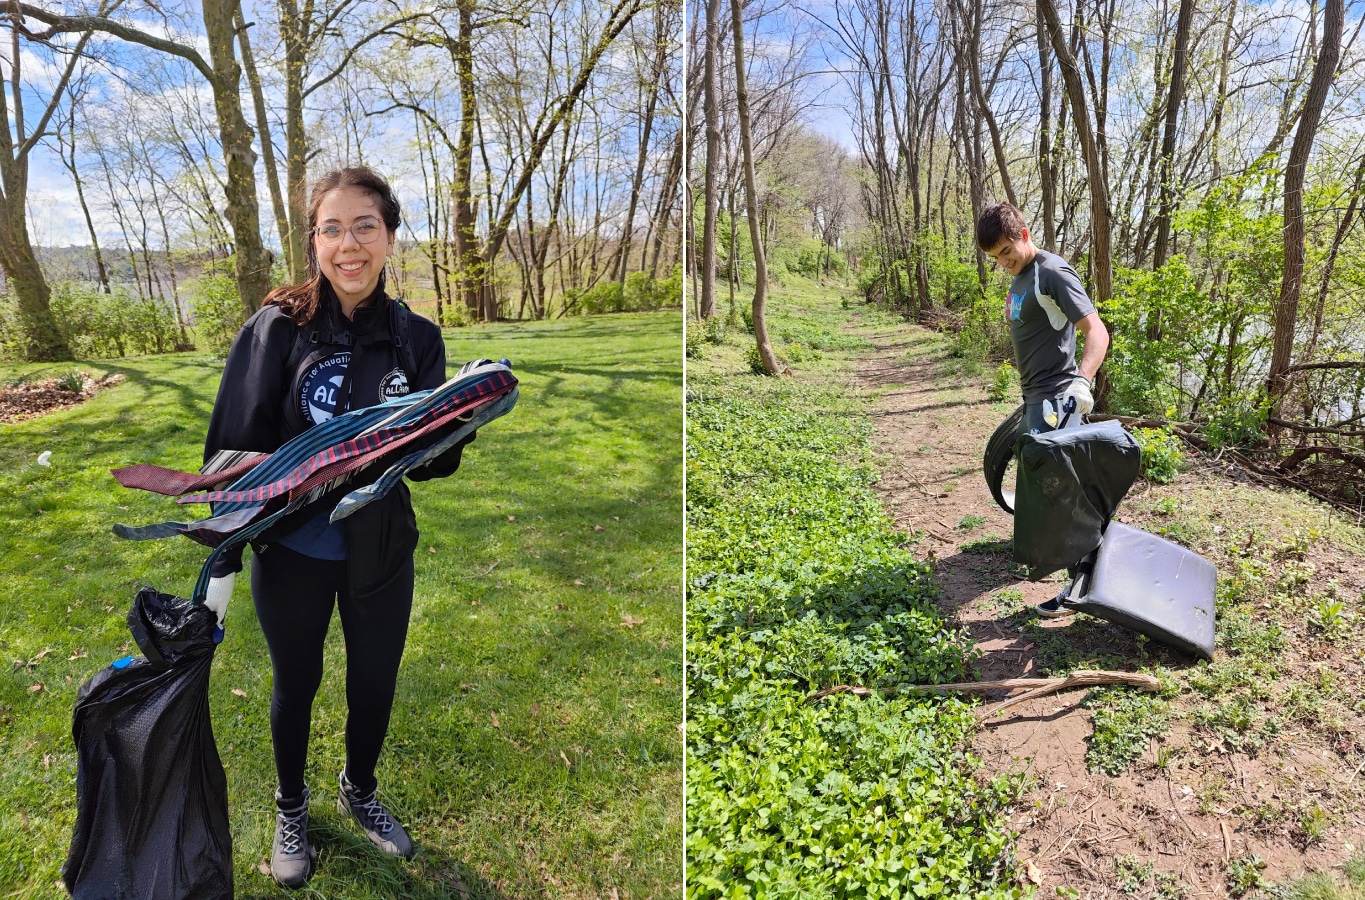 Left: An ALLARM volunteer presents the neckties they found. Right, a Franklin and Marshall Wrestling team volunteer helps haul some large plastic containers.